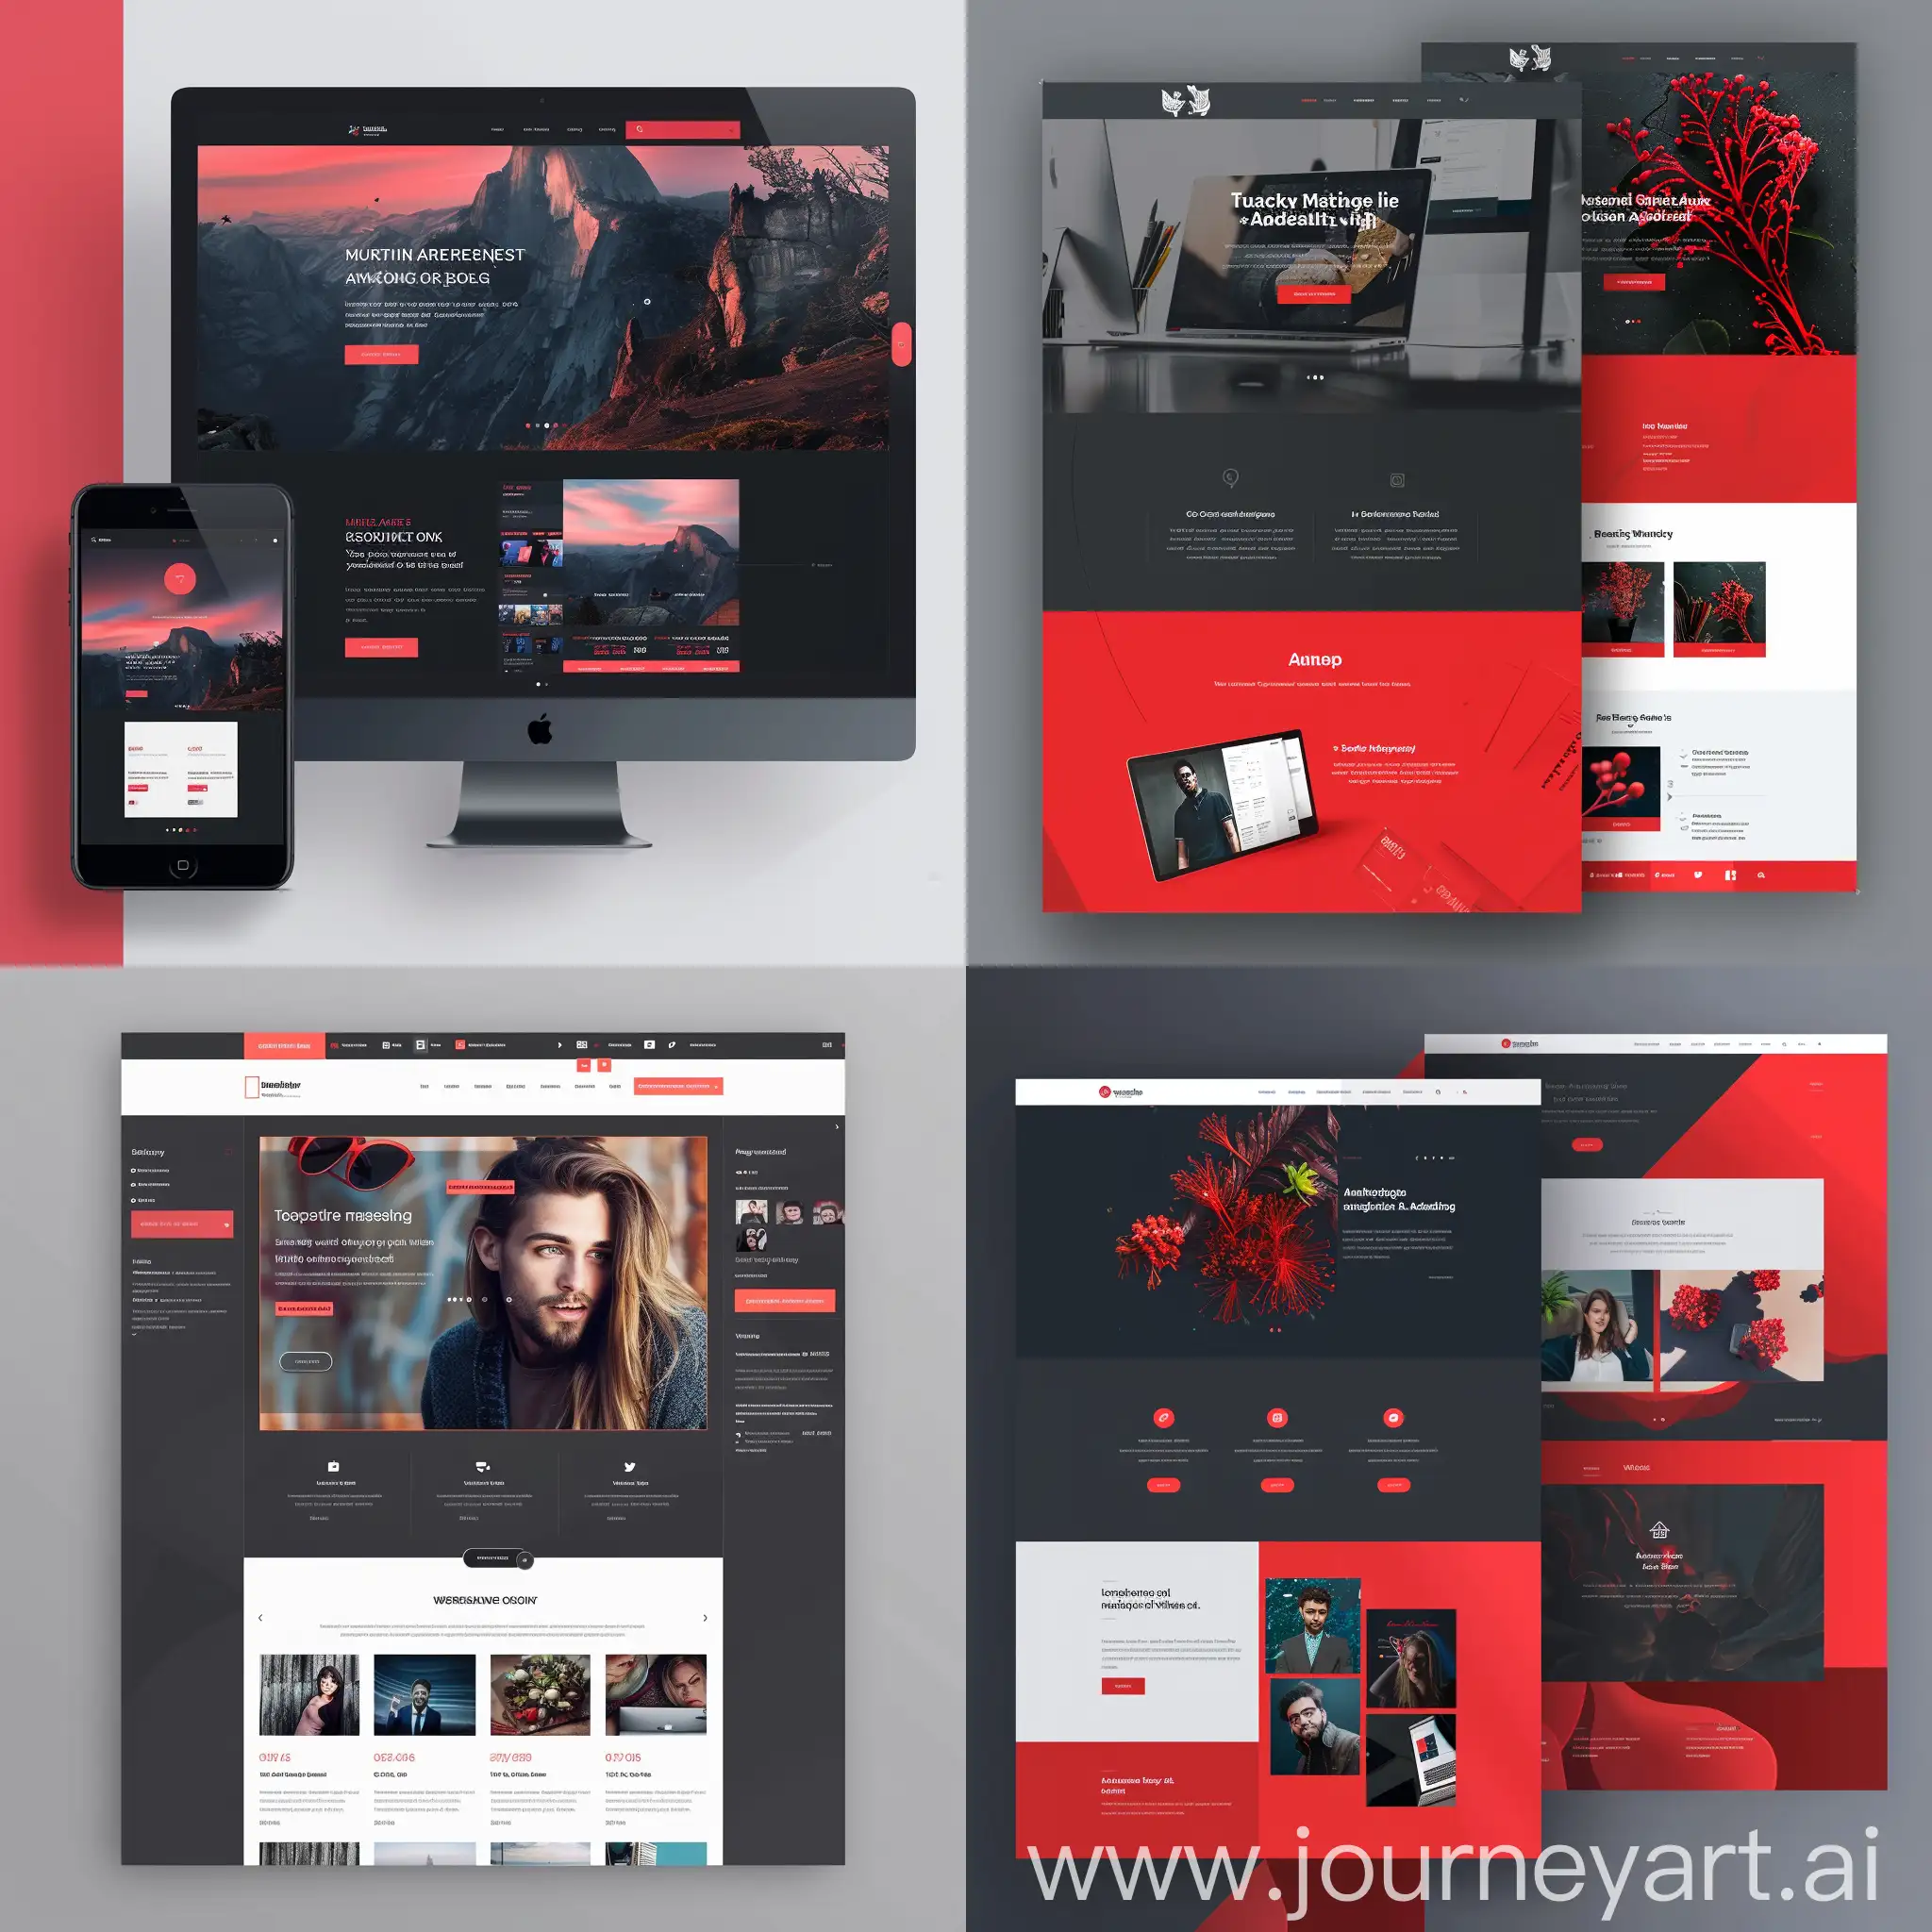 Modern-Marketing-and-Advertising-Website-Beautiful-UIUX-Design-in-Red-and-Dark-Gray